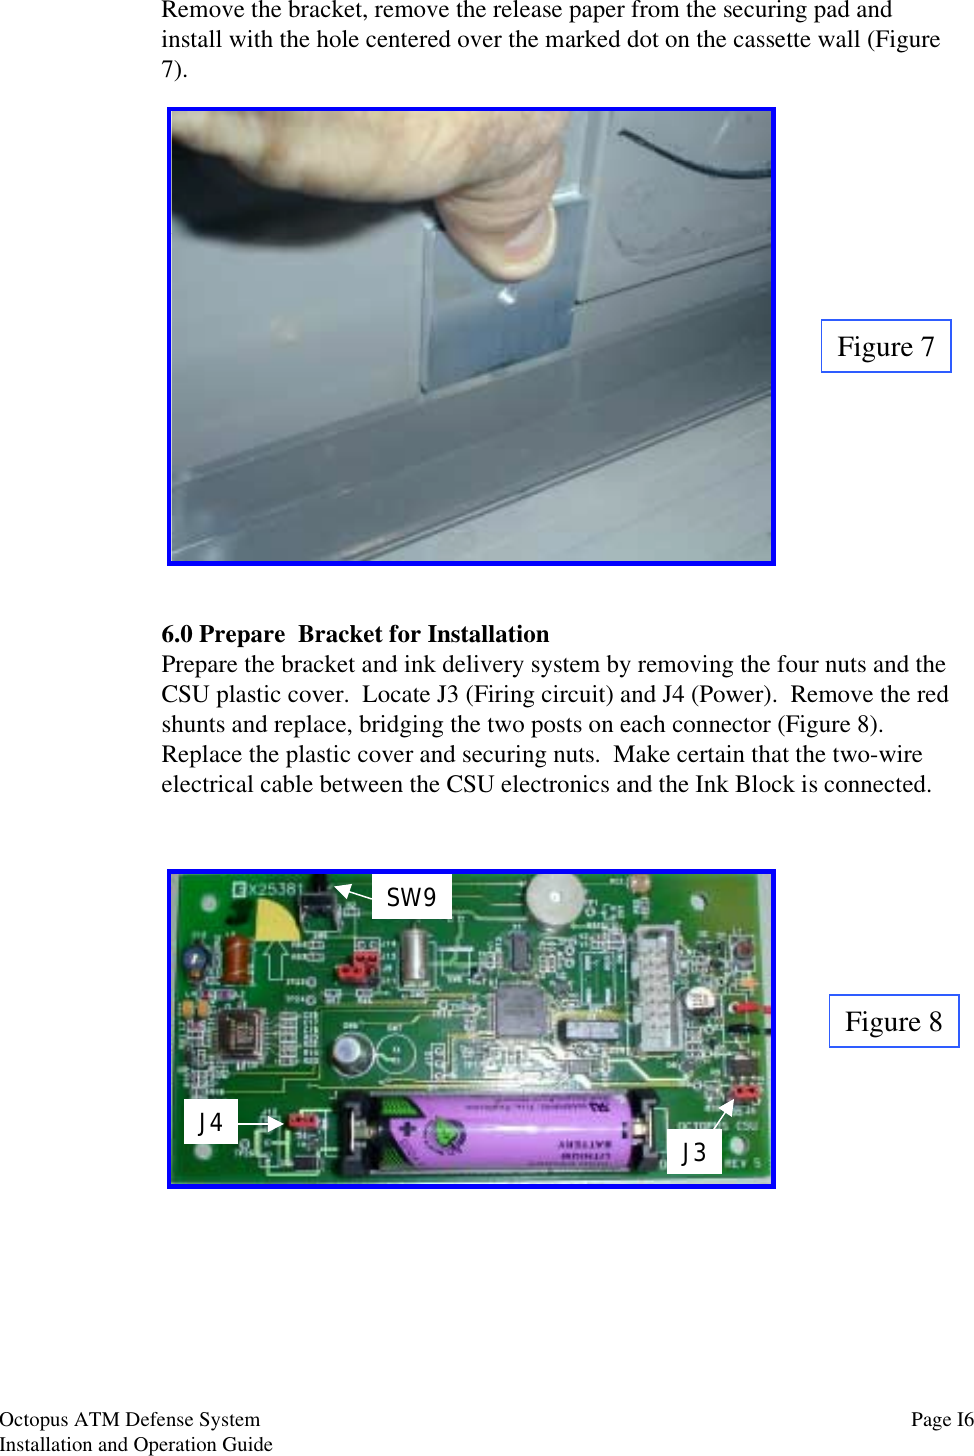 Remove the bracket, remove the release paper from the securing pad andinstall with the hole centered over the marked dot on the cassette wall (Figure7).Figure 76.0 Prepare  Bracket for InstallationPrepare the bracket and ink delivery system by removing the four nuts and theCSU plastic cover.  Locate J3 (Firing circuit) and J4 (Power).  Remove the redshunts and replace, bridging the two posts on each connector (Figure 8).Replace the plastic cover and securing nuts.  Make certain that the two-wireelectrical cable between the CSU electronics and the Ink Block is connected.Figure 8J4 J3SW9Page I6Octopus ATM Defense SystemInstallation and Operation Guide